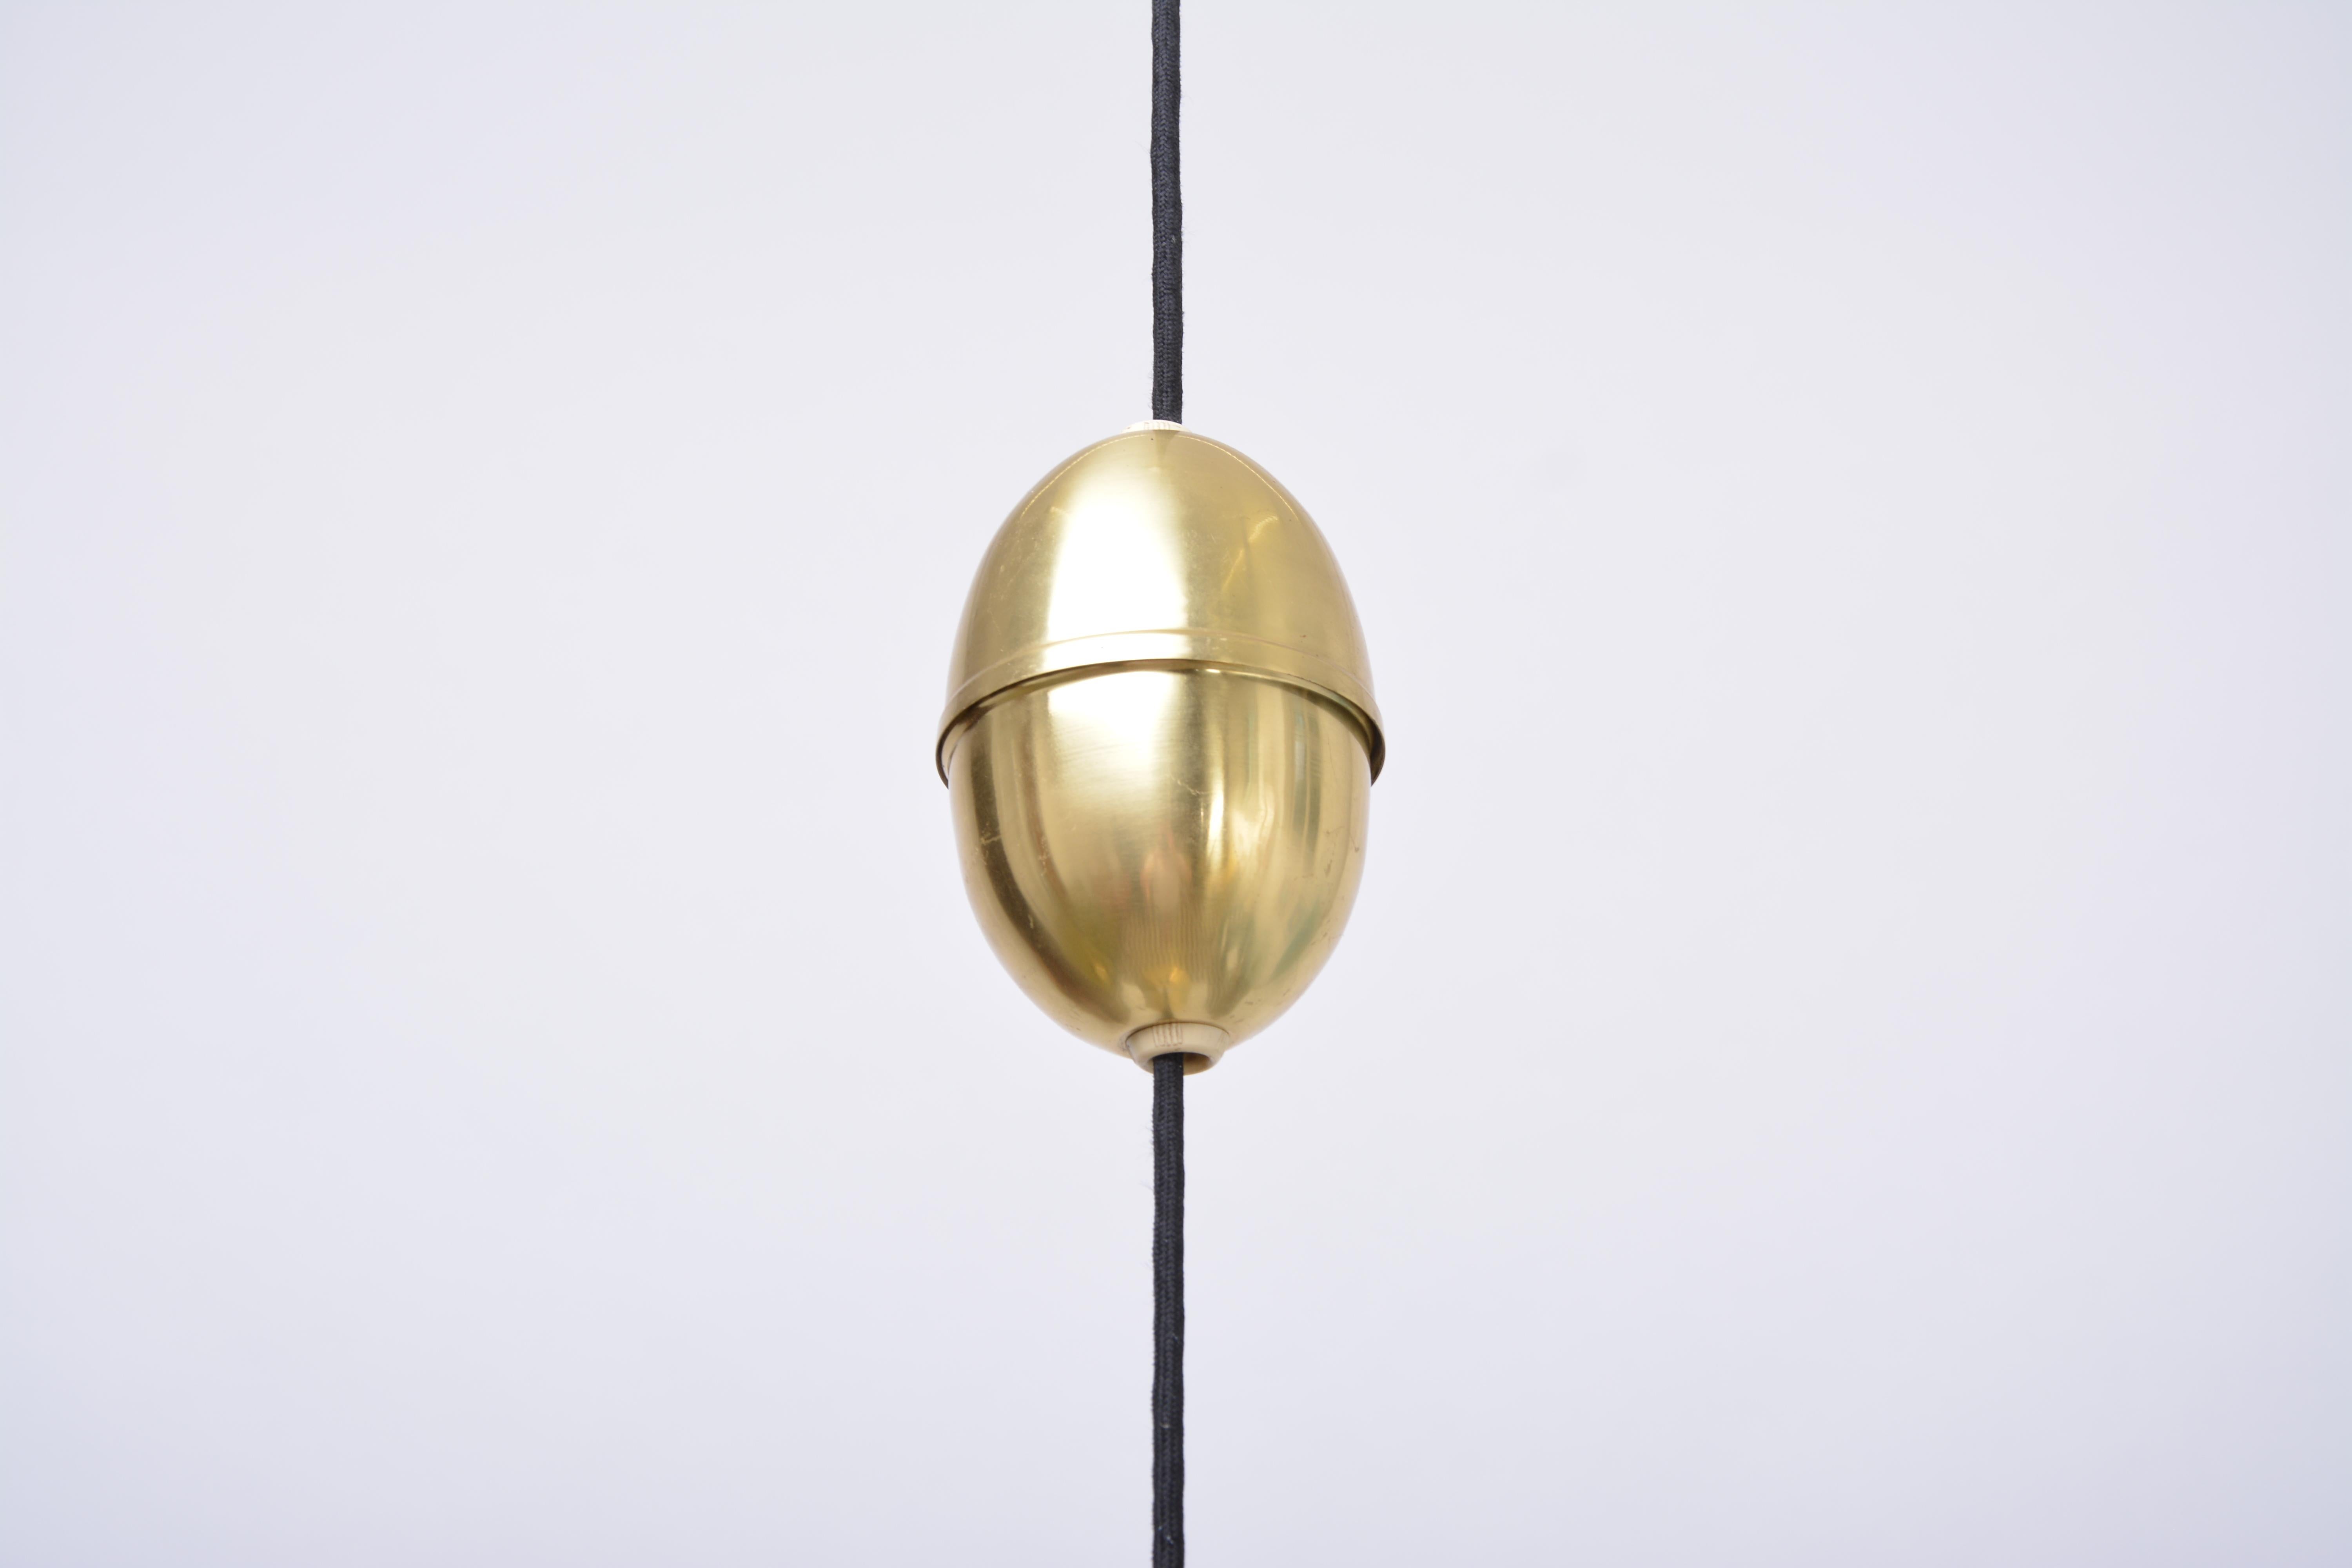 Danish Mid-Century Modern Brass pendant light by Fritz Schlegel for Lyfa

This solid brass pendant light was designed by Fritz Schlegel in the 1960s.
The model P 295 was manufactured by Lyfa in Denmark and features a brass mounting bracket with